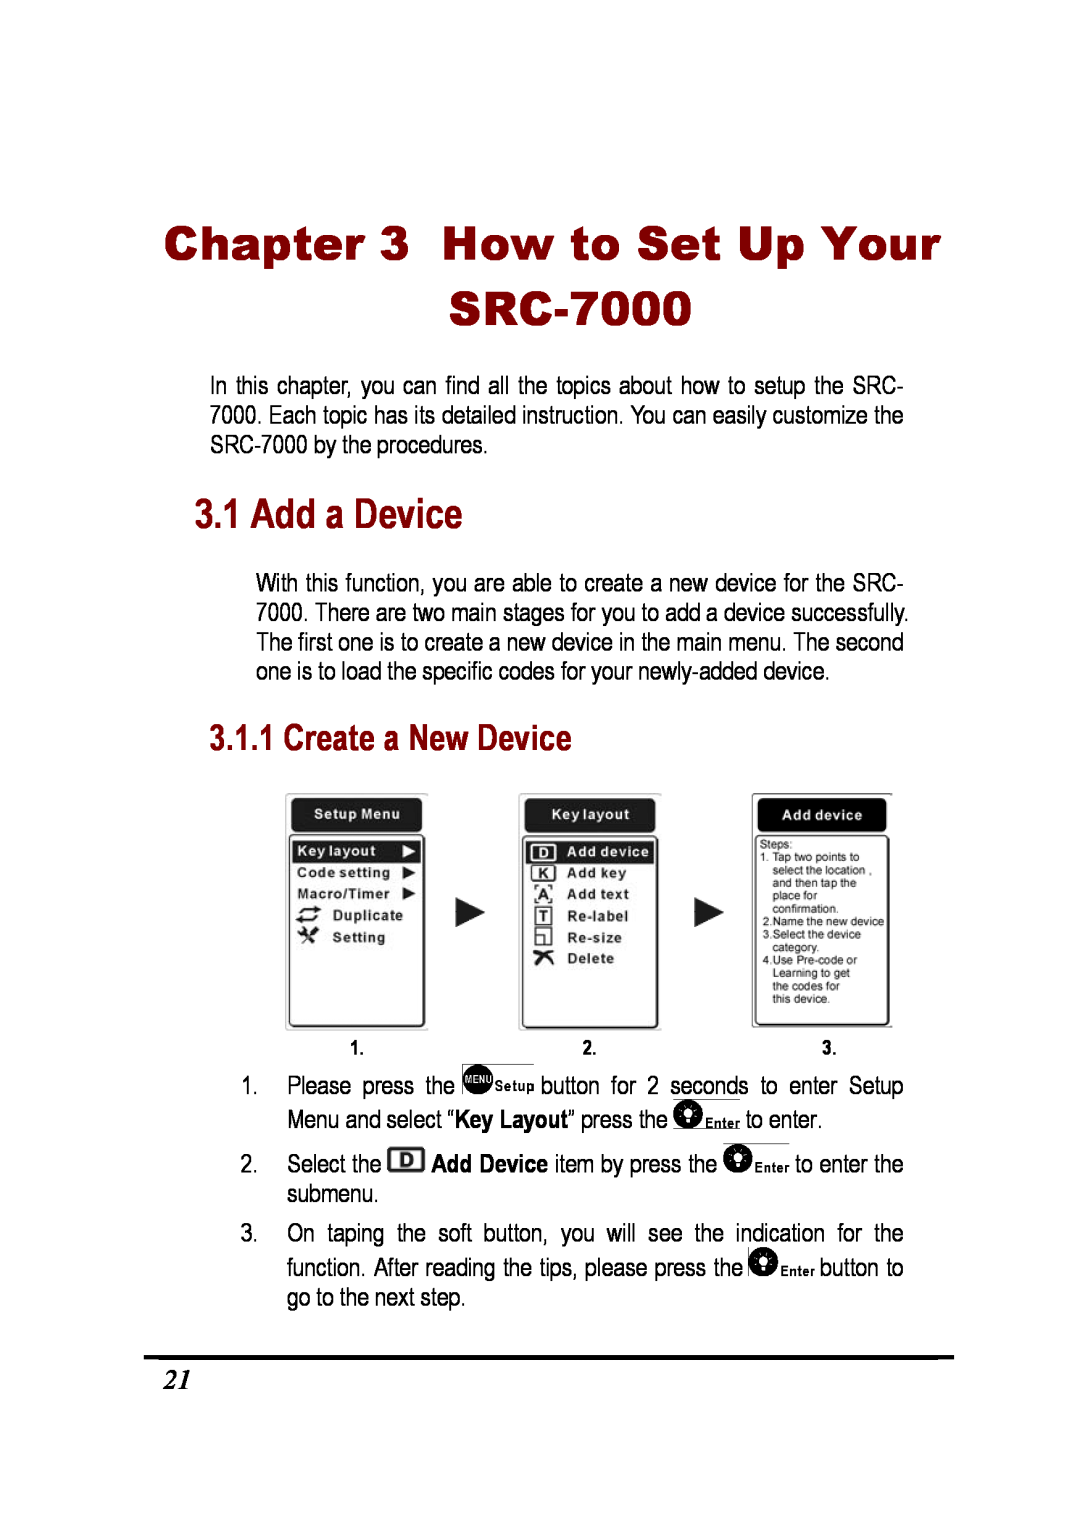 Sunwave Tech manual How to Set Up Your SRC-7000, Add a Device, Create a New Device 